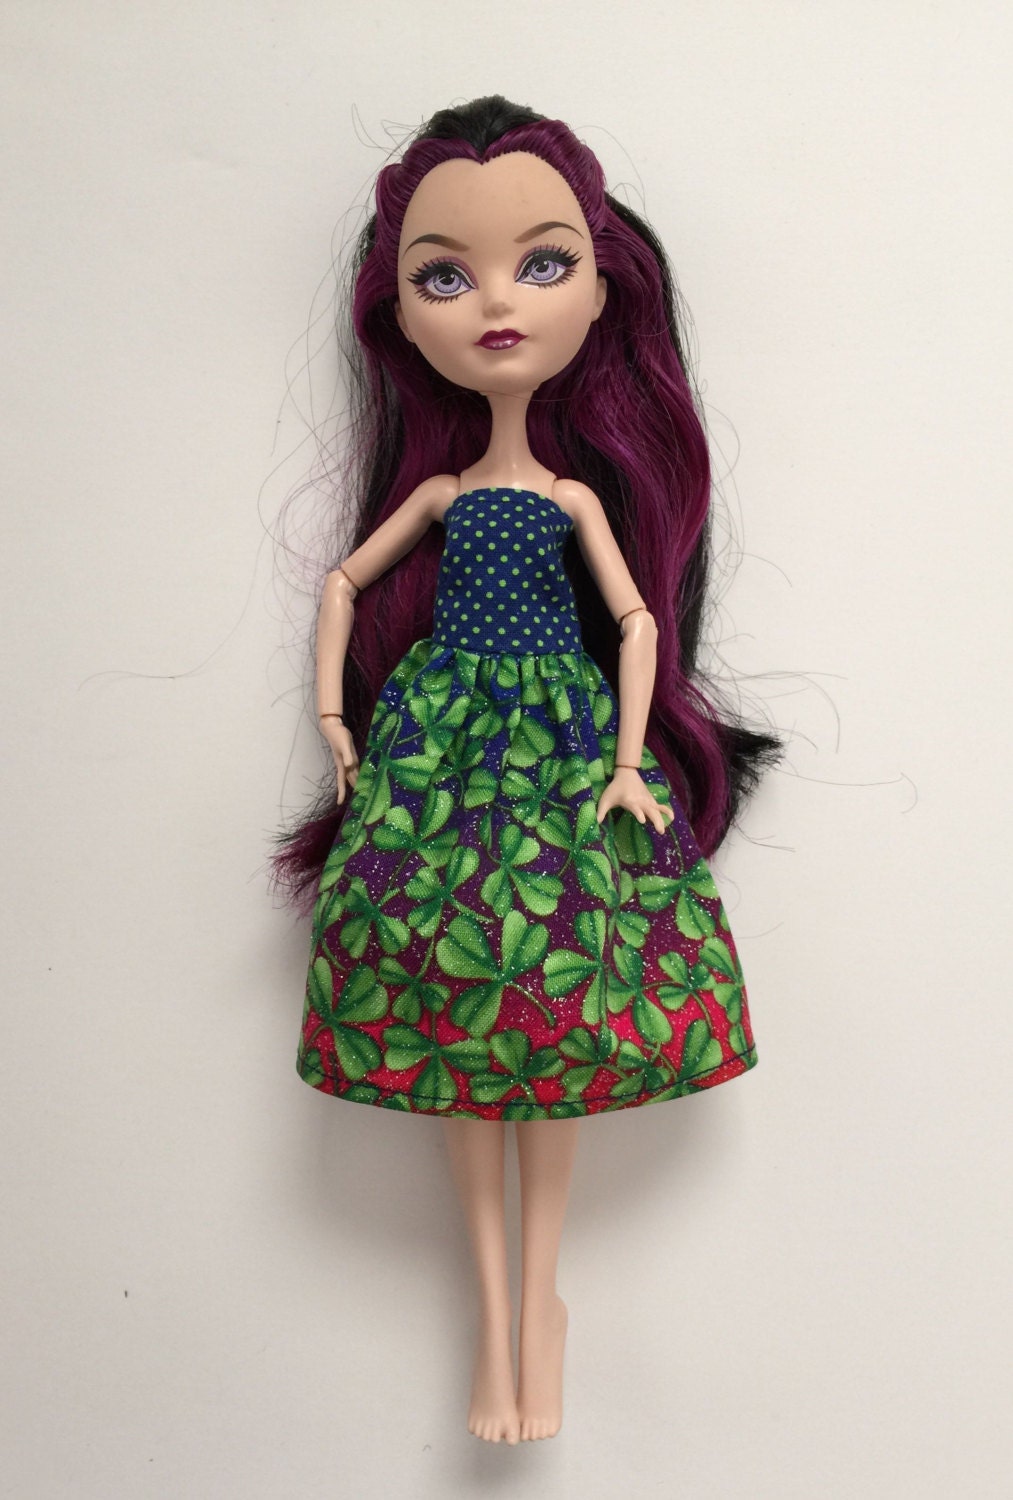 Handmade Ever After High Clothes Dress by All4U on Etsy